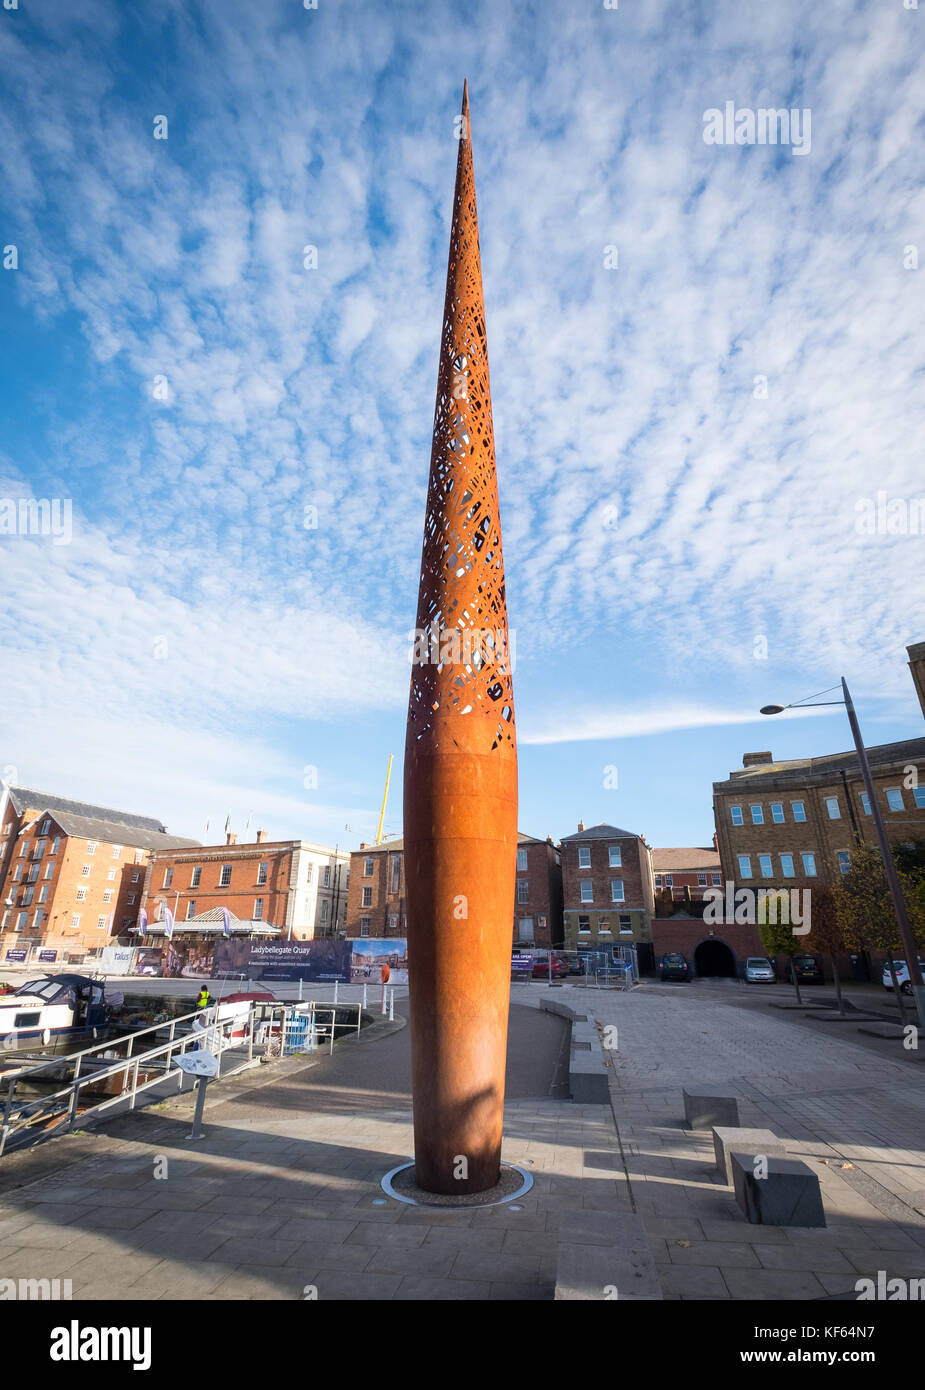 Public art beacon sculpture by Wolfgang Buttress in Gloucester Docks known as The Candle, Gloucestershire, UK Stock Photo